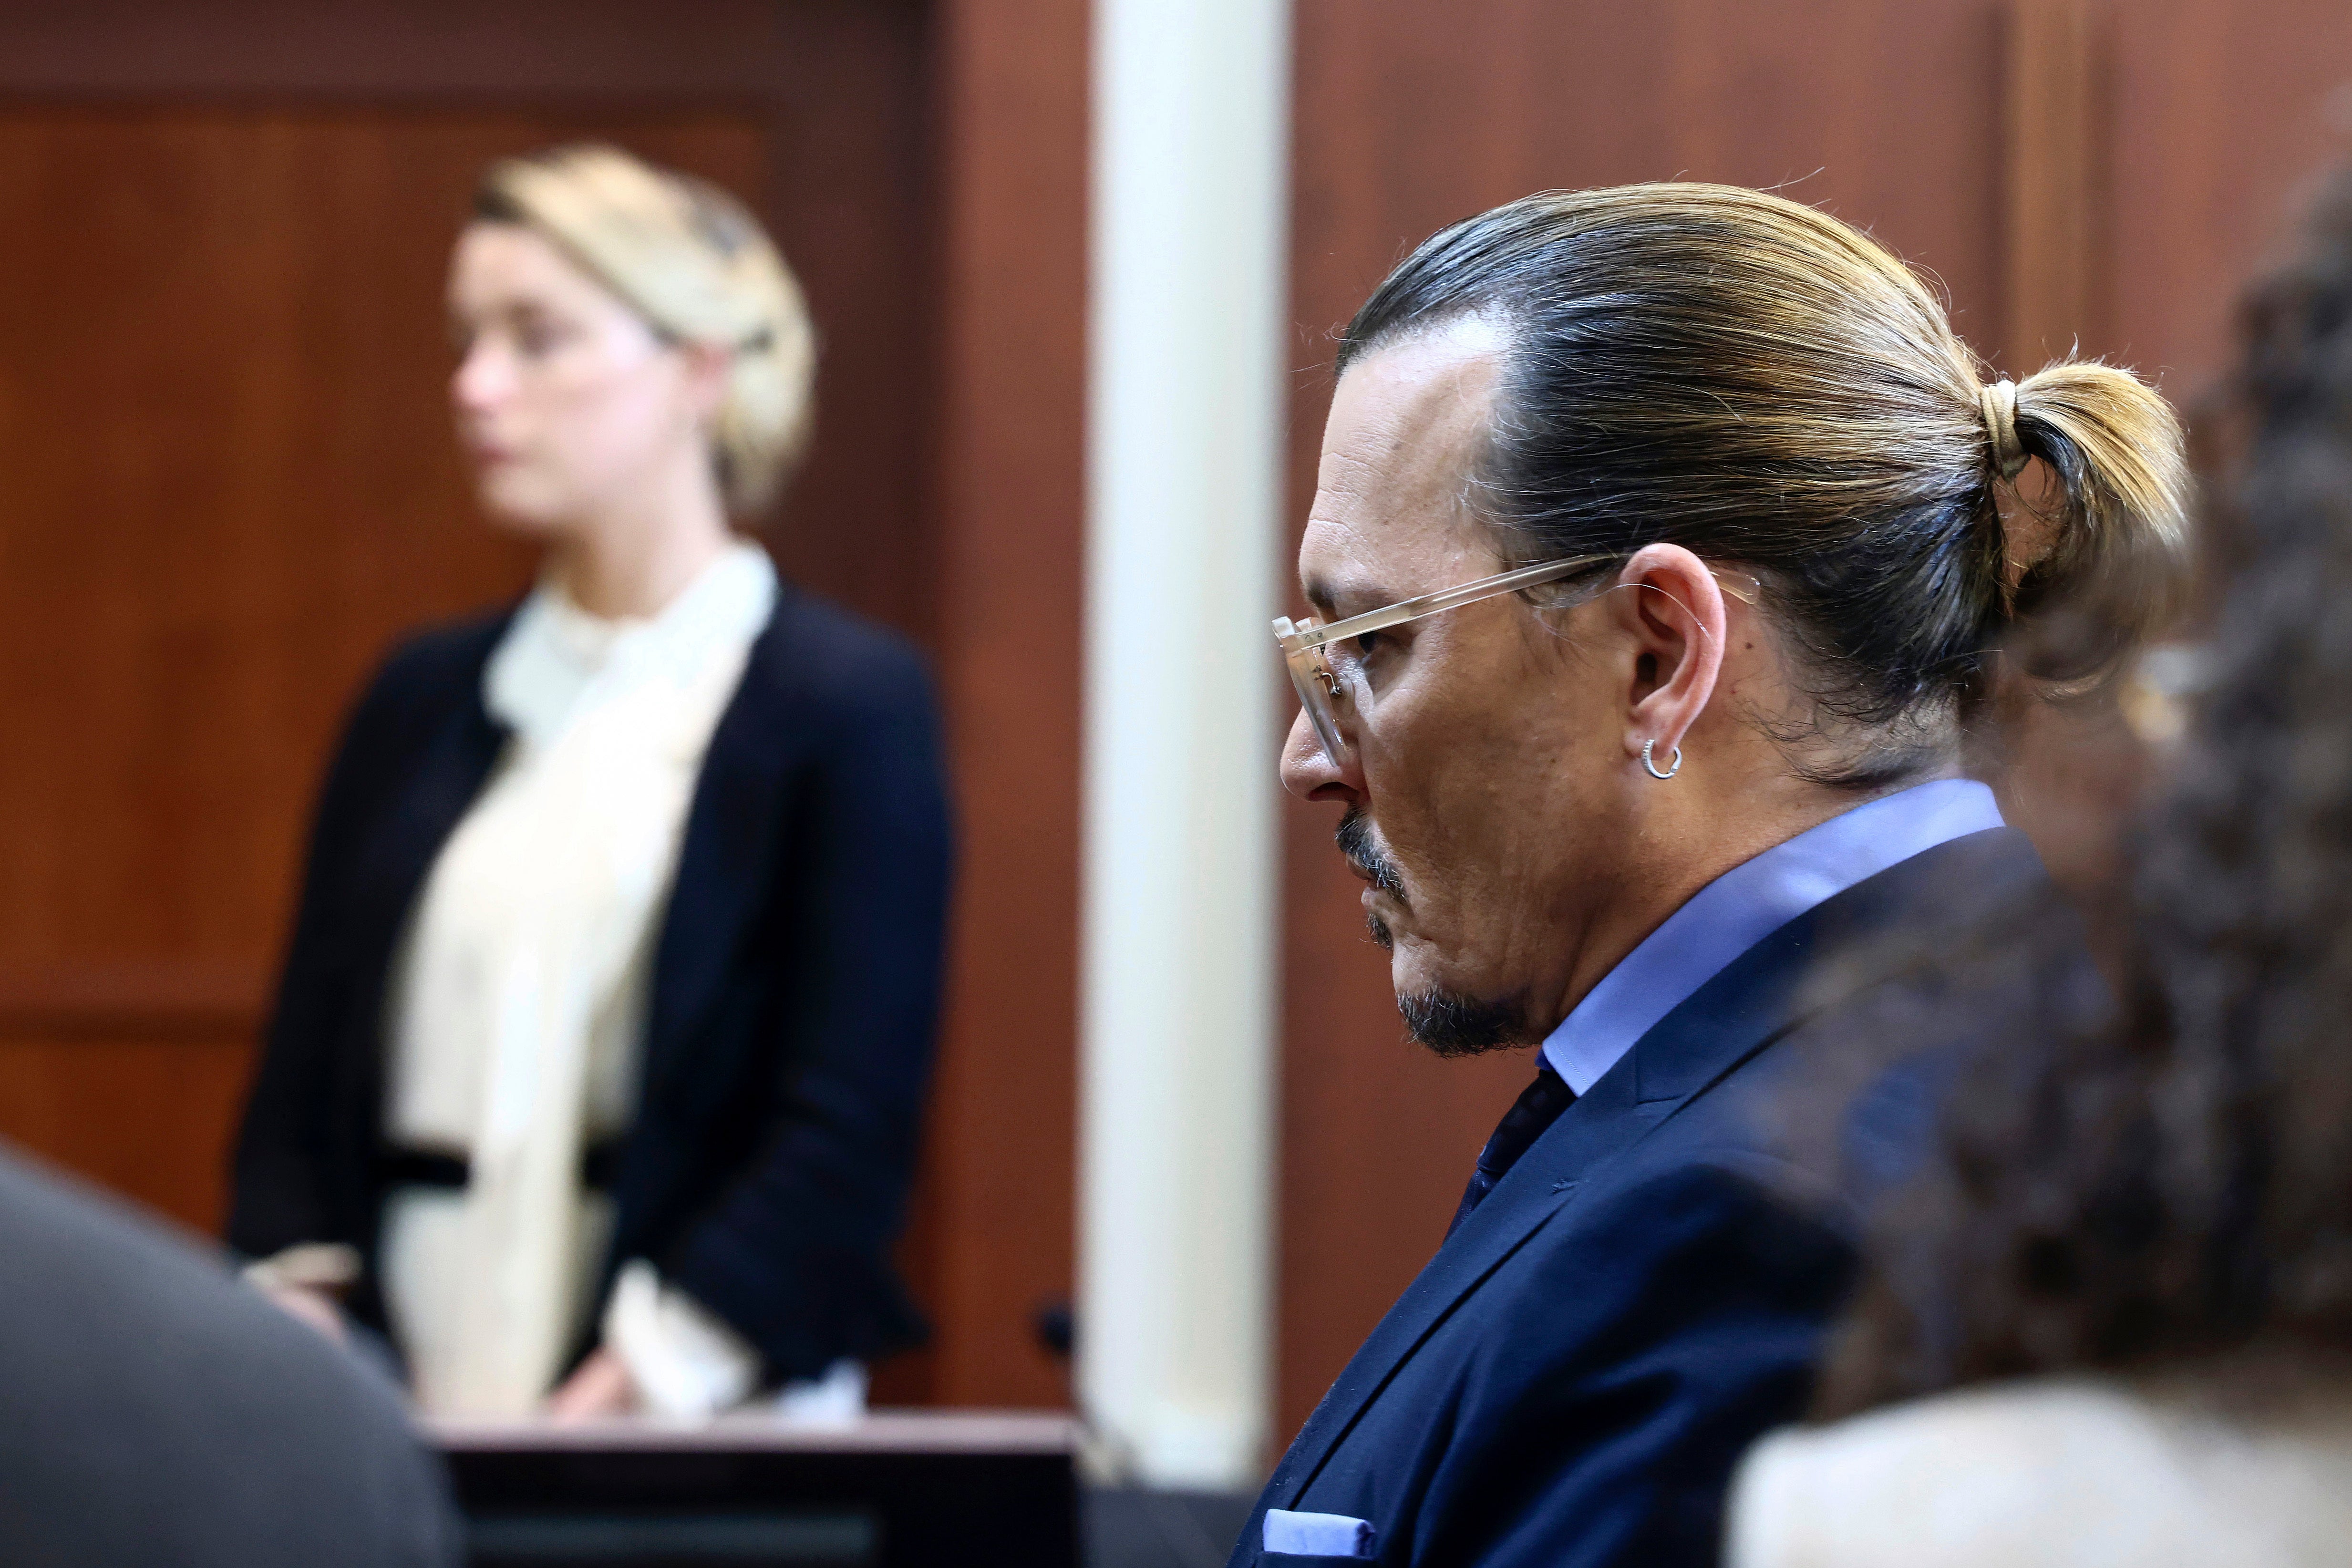 Johnny Depp looks on as Amber Heard takes the witness stand on 5 May